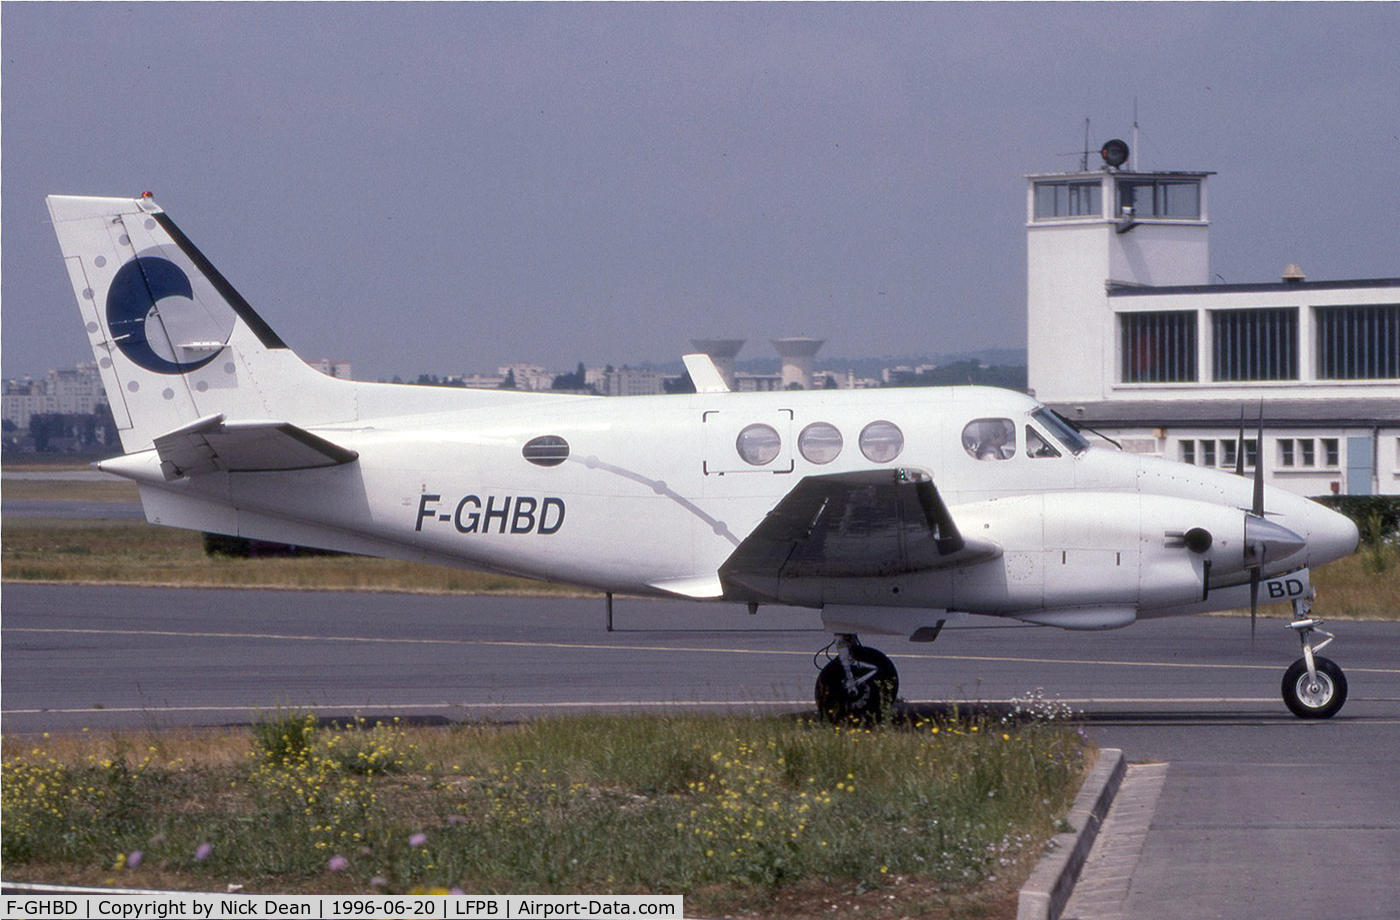 F-GHBD, 1972 Beech C90 King Air C/N LJ-545, Obviously a King Air taxying in France